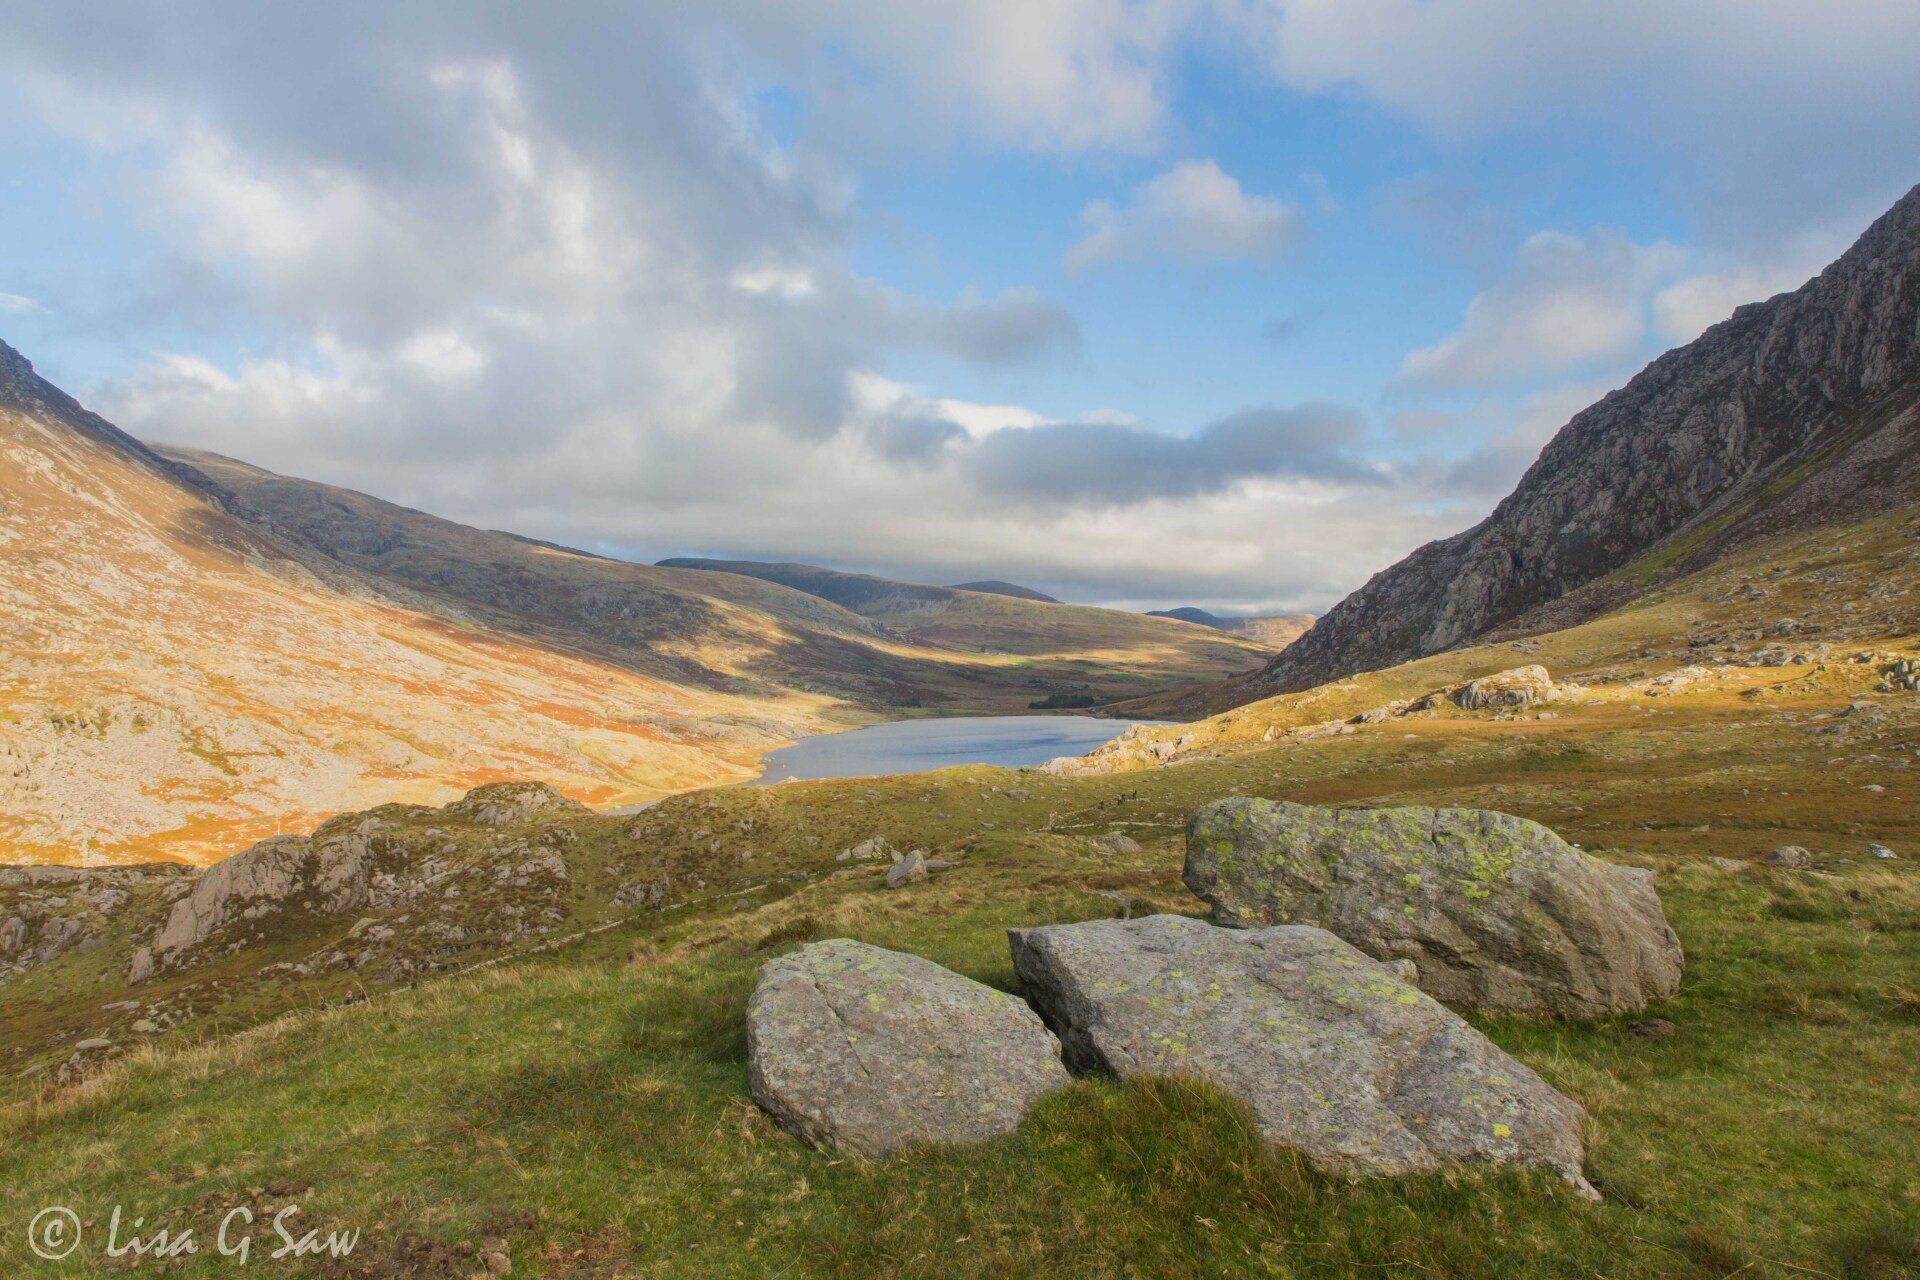 Overlooking Llyn Ogwen with rocks in foreground